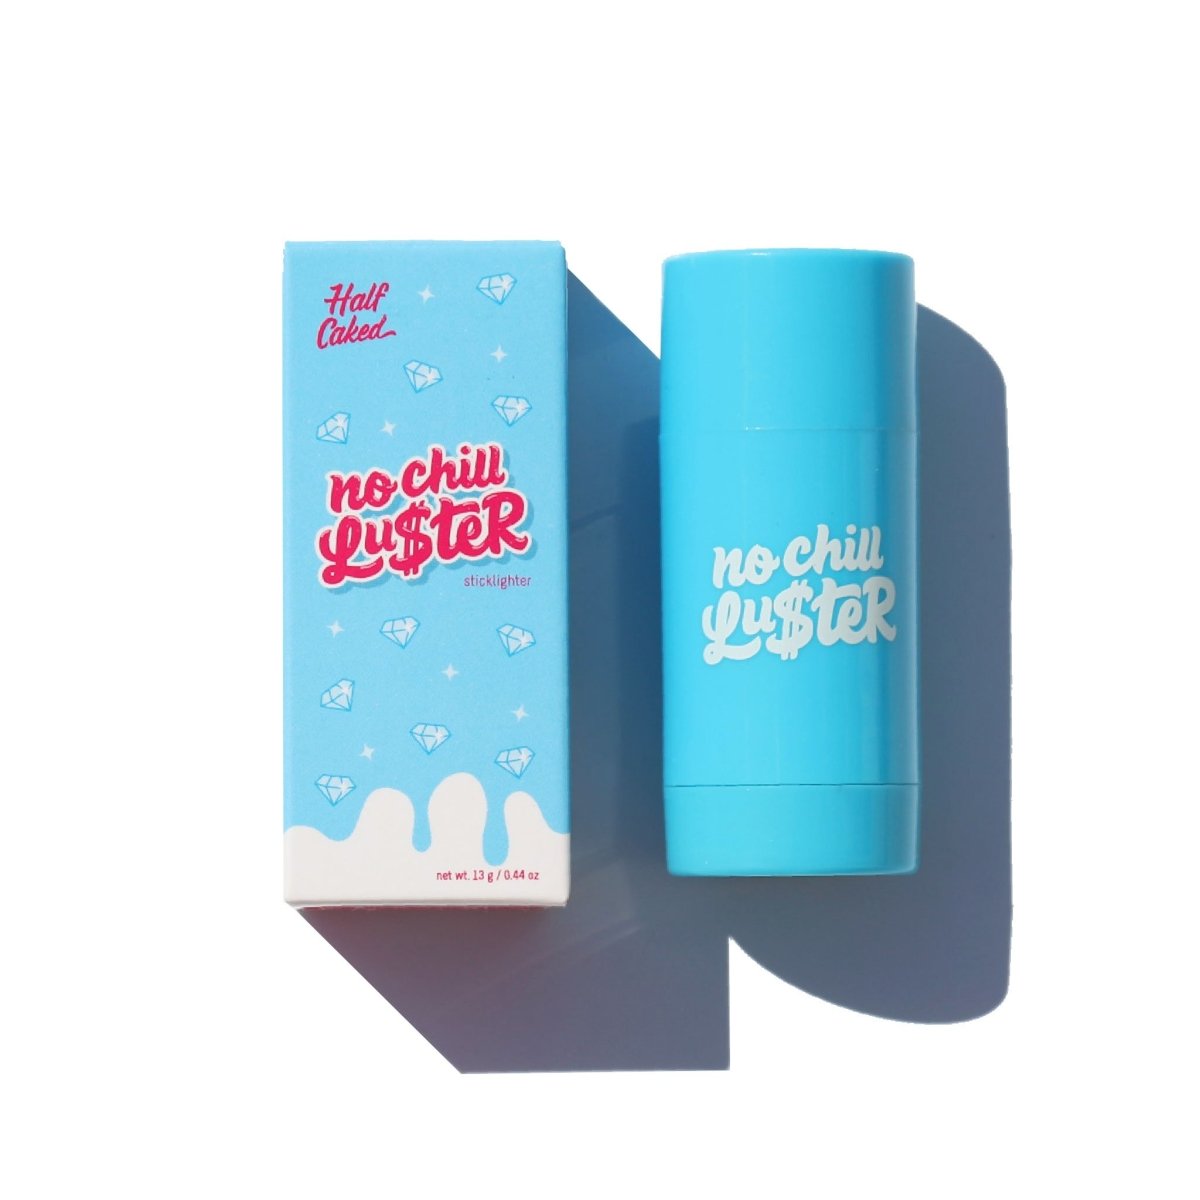 blue white pink box with no chill luster on front - Glass Skin Duo - Half Caked